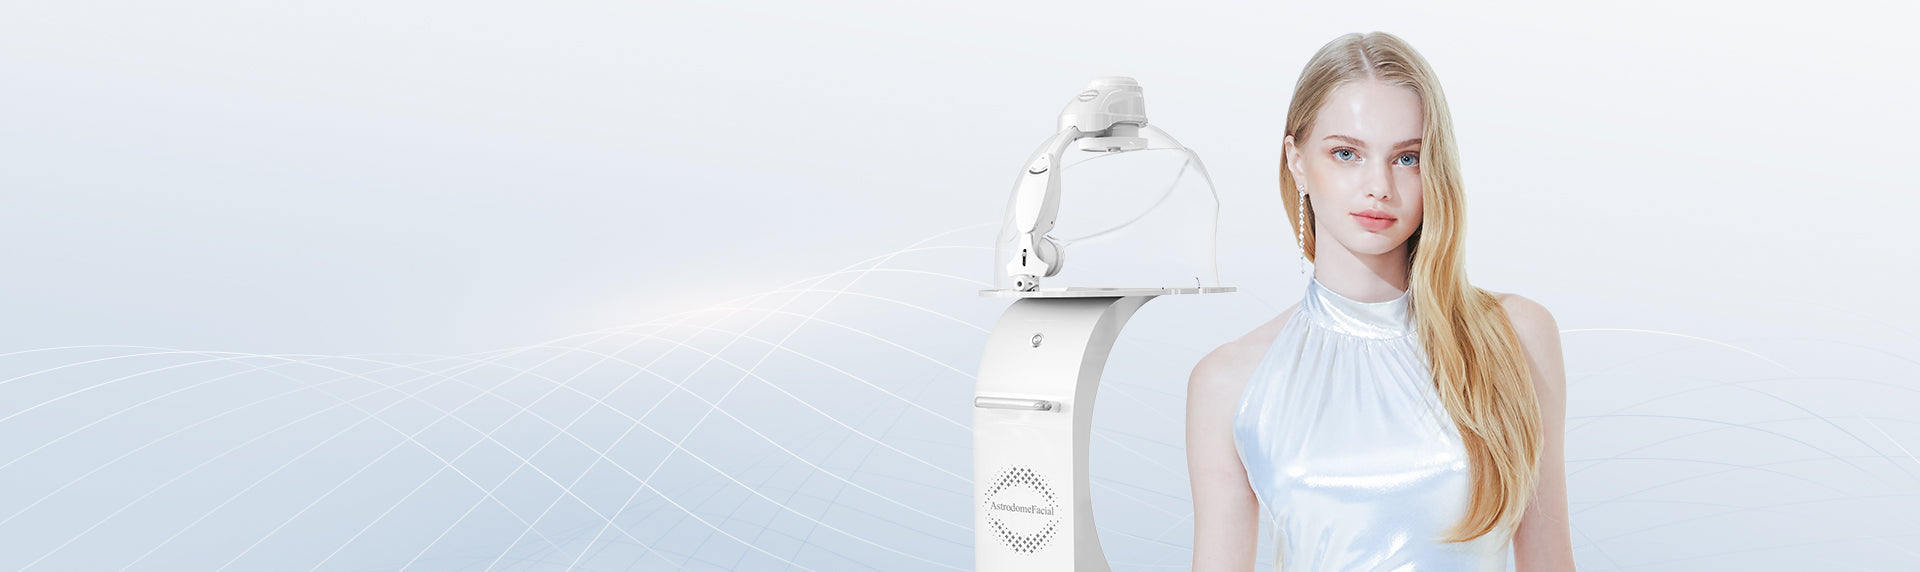  A model standing by the popular AstrodomeFacial LED Anion oxygen therapy aesthetic device by OxygenCeuticals.